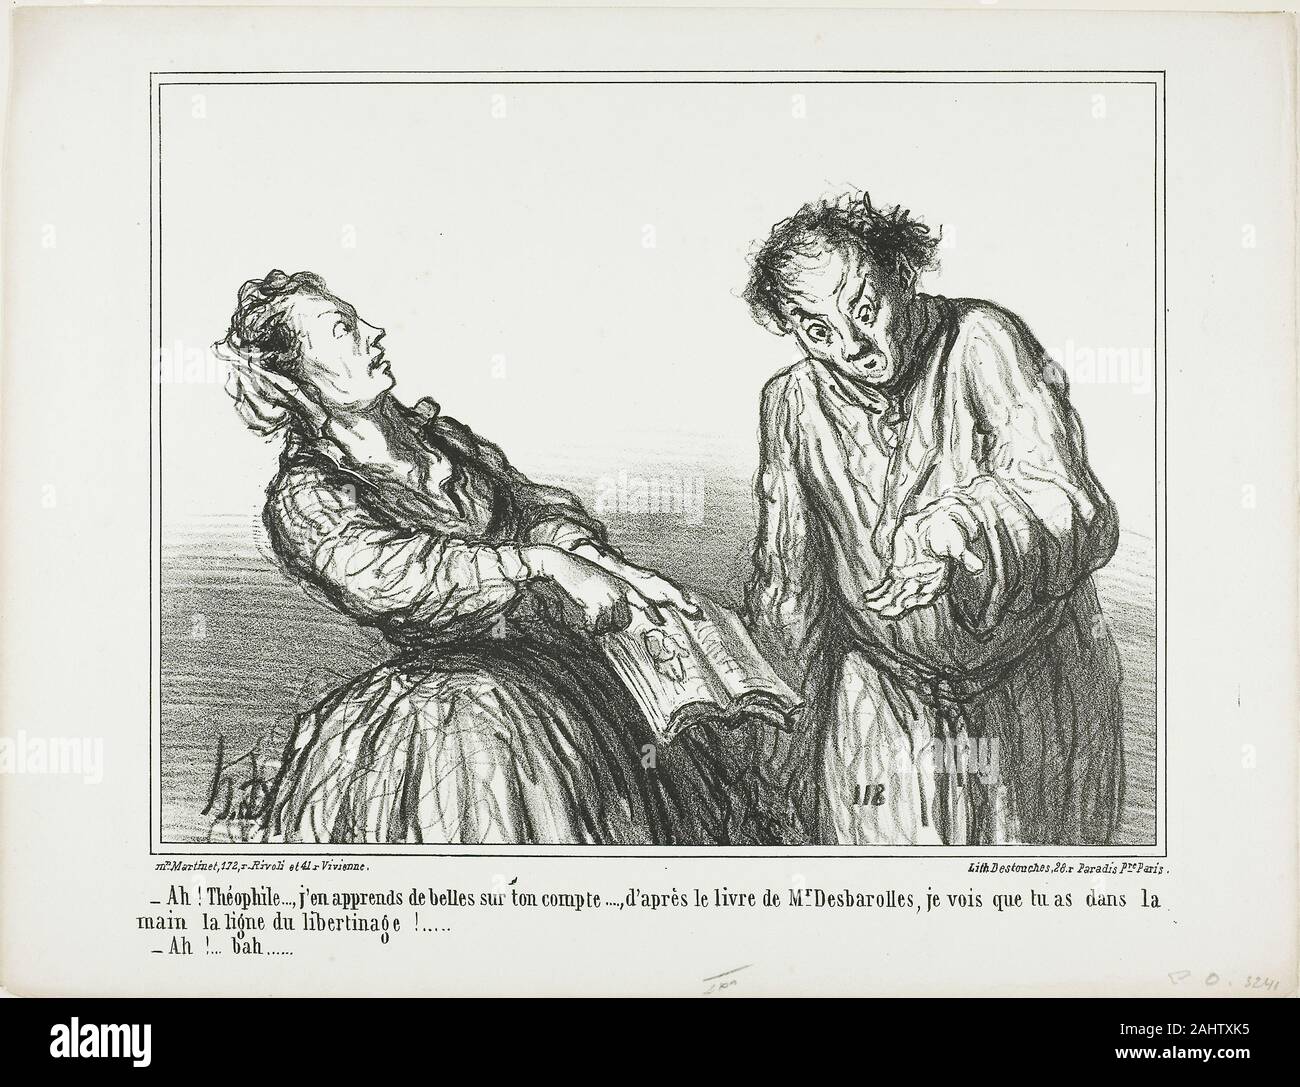 Honoré-Victorin Daumier. “- Ah, Théophile, what ghastly things I am reading about you. According to the book by Mr. Desbarolles, I can tell that you have in your palm the lines of a libertinage!… - Oh, well…,” plate 1 from Ces Bons Parisiens. 1860. France. Lithograph in black on white wove paper Stock Photo